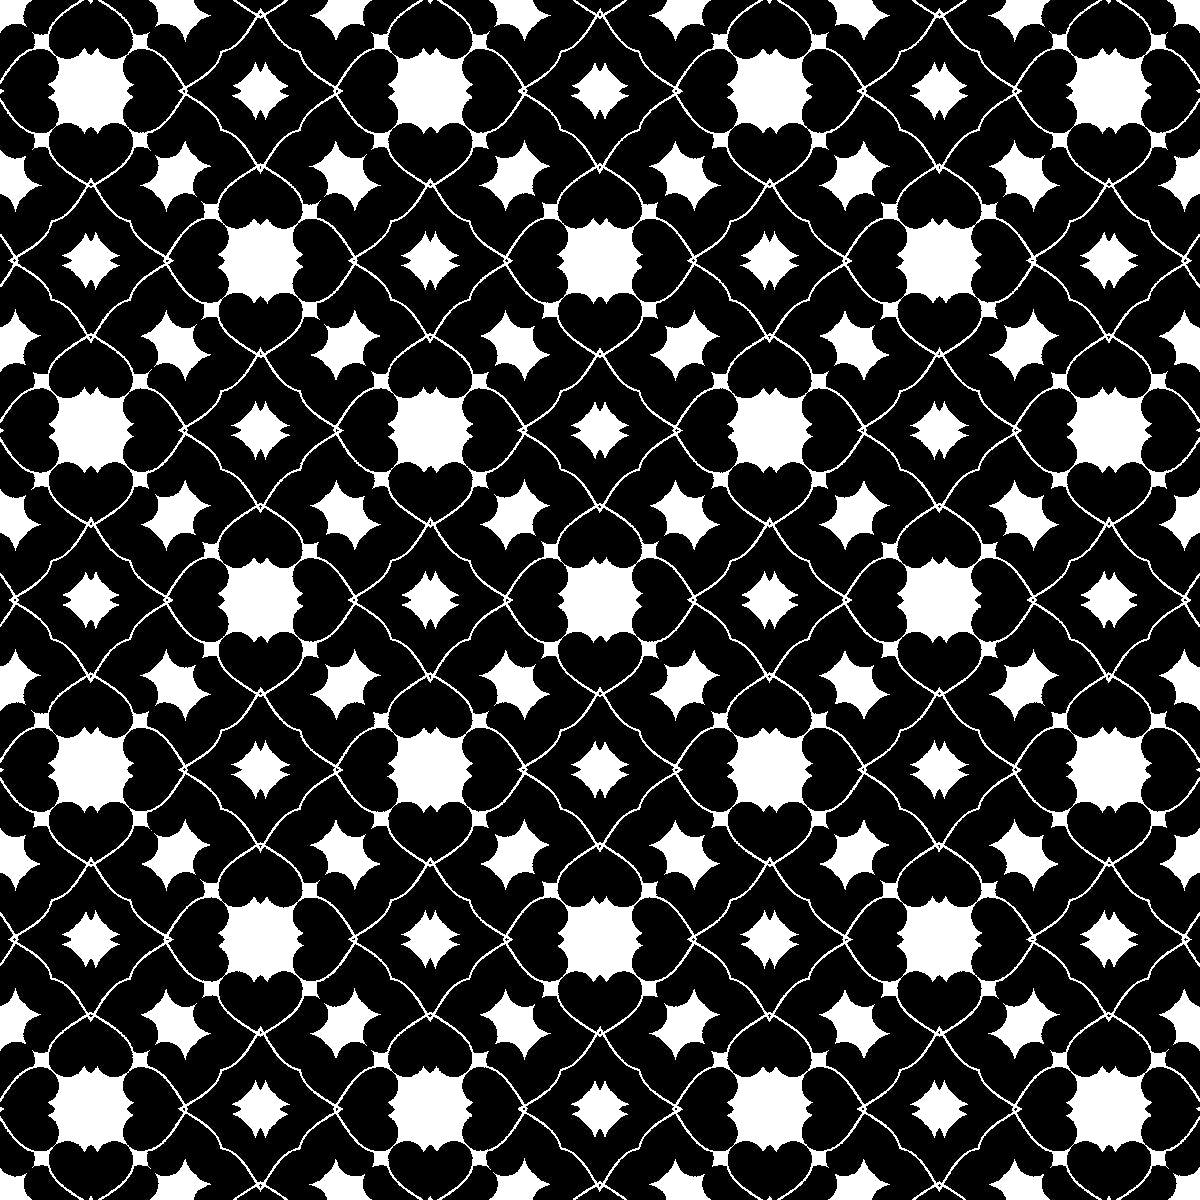 Black and White Abstract Seamless Pattern 47.0 - Printable Scrapbook Paper